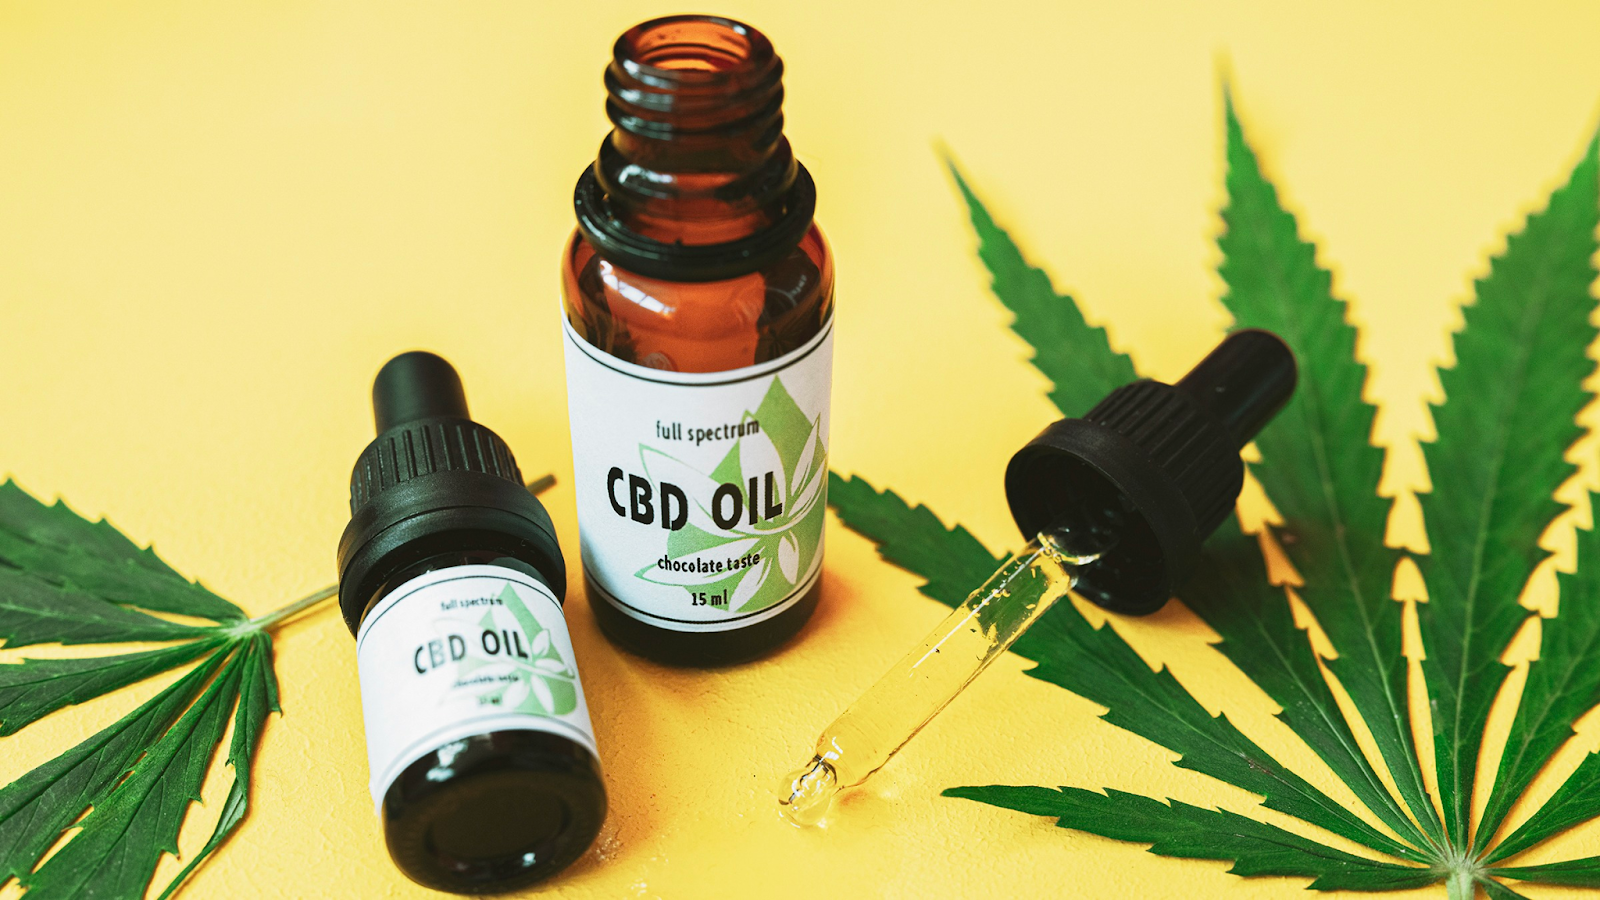 CBD can affect muscle growth in a positive way